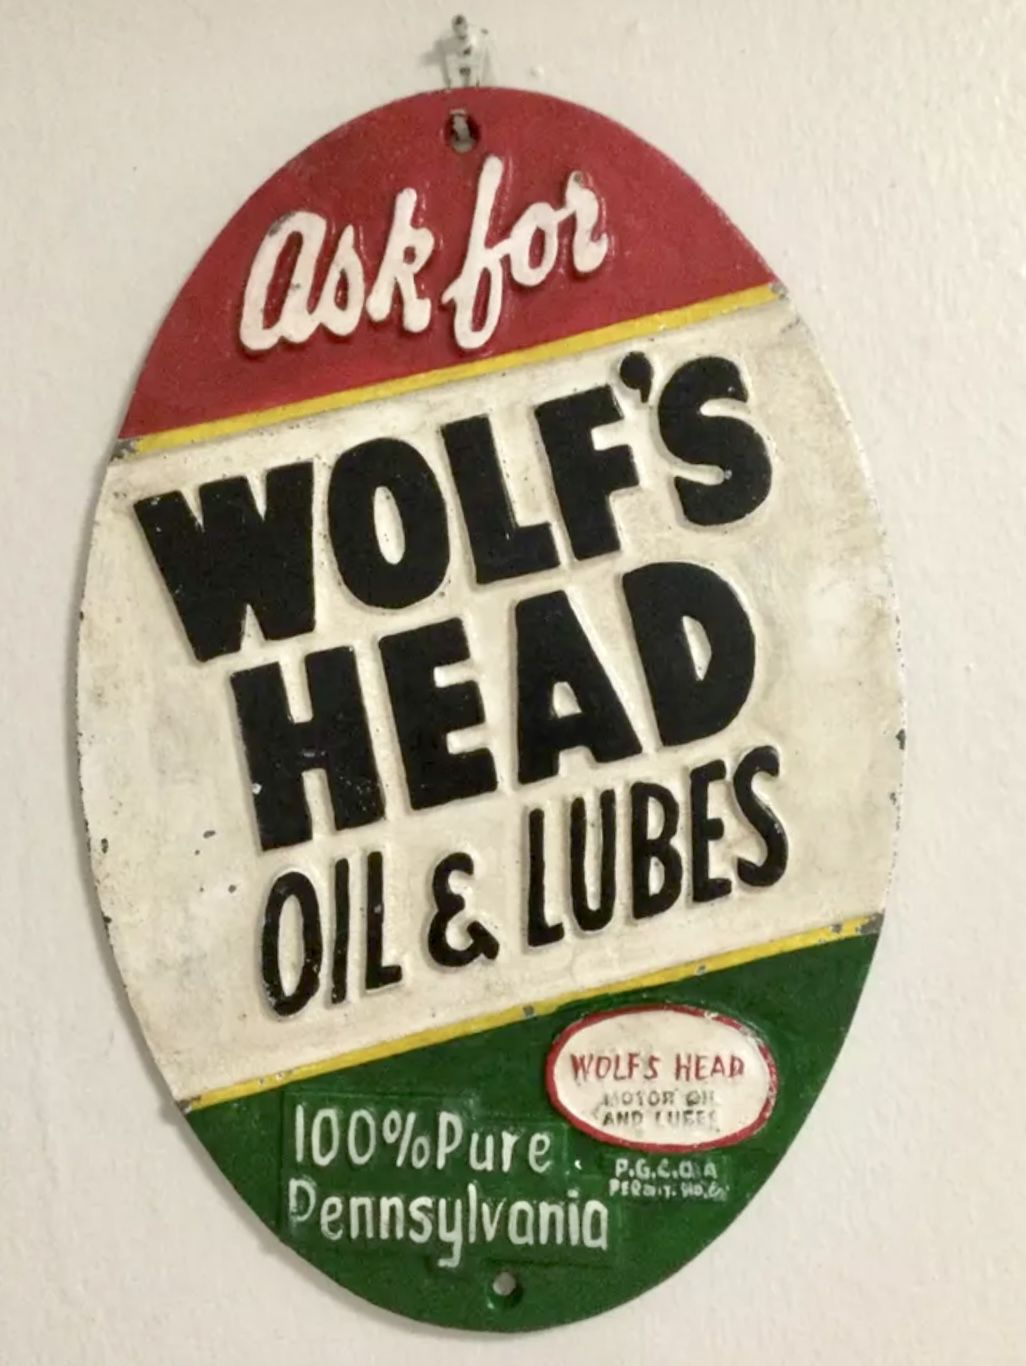 Rare Vintage Wolf’s Head Oil & Lubes Cast Iron Advertising Sign 1955